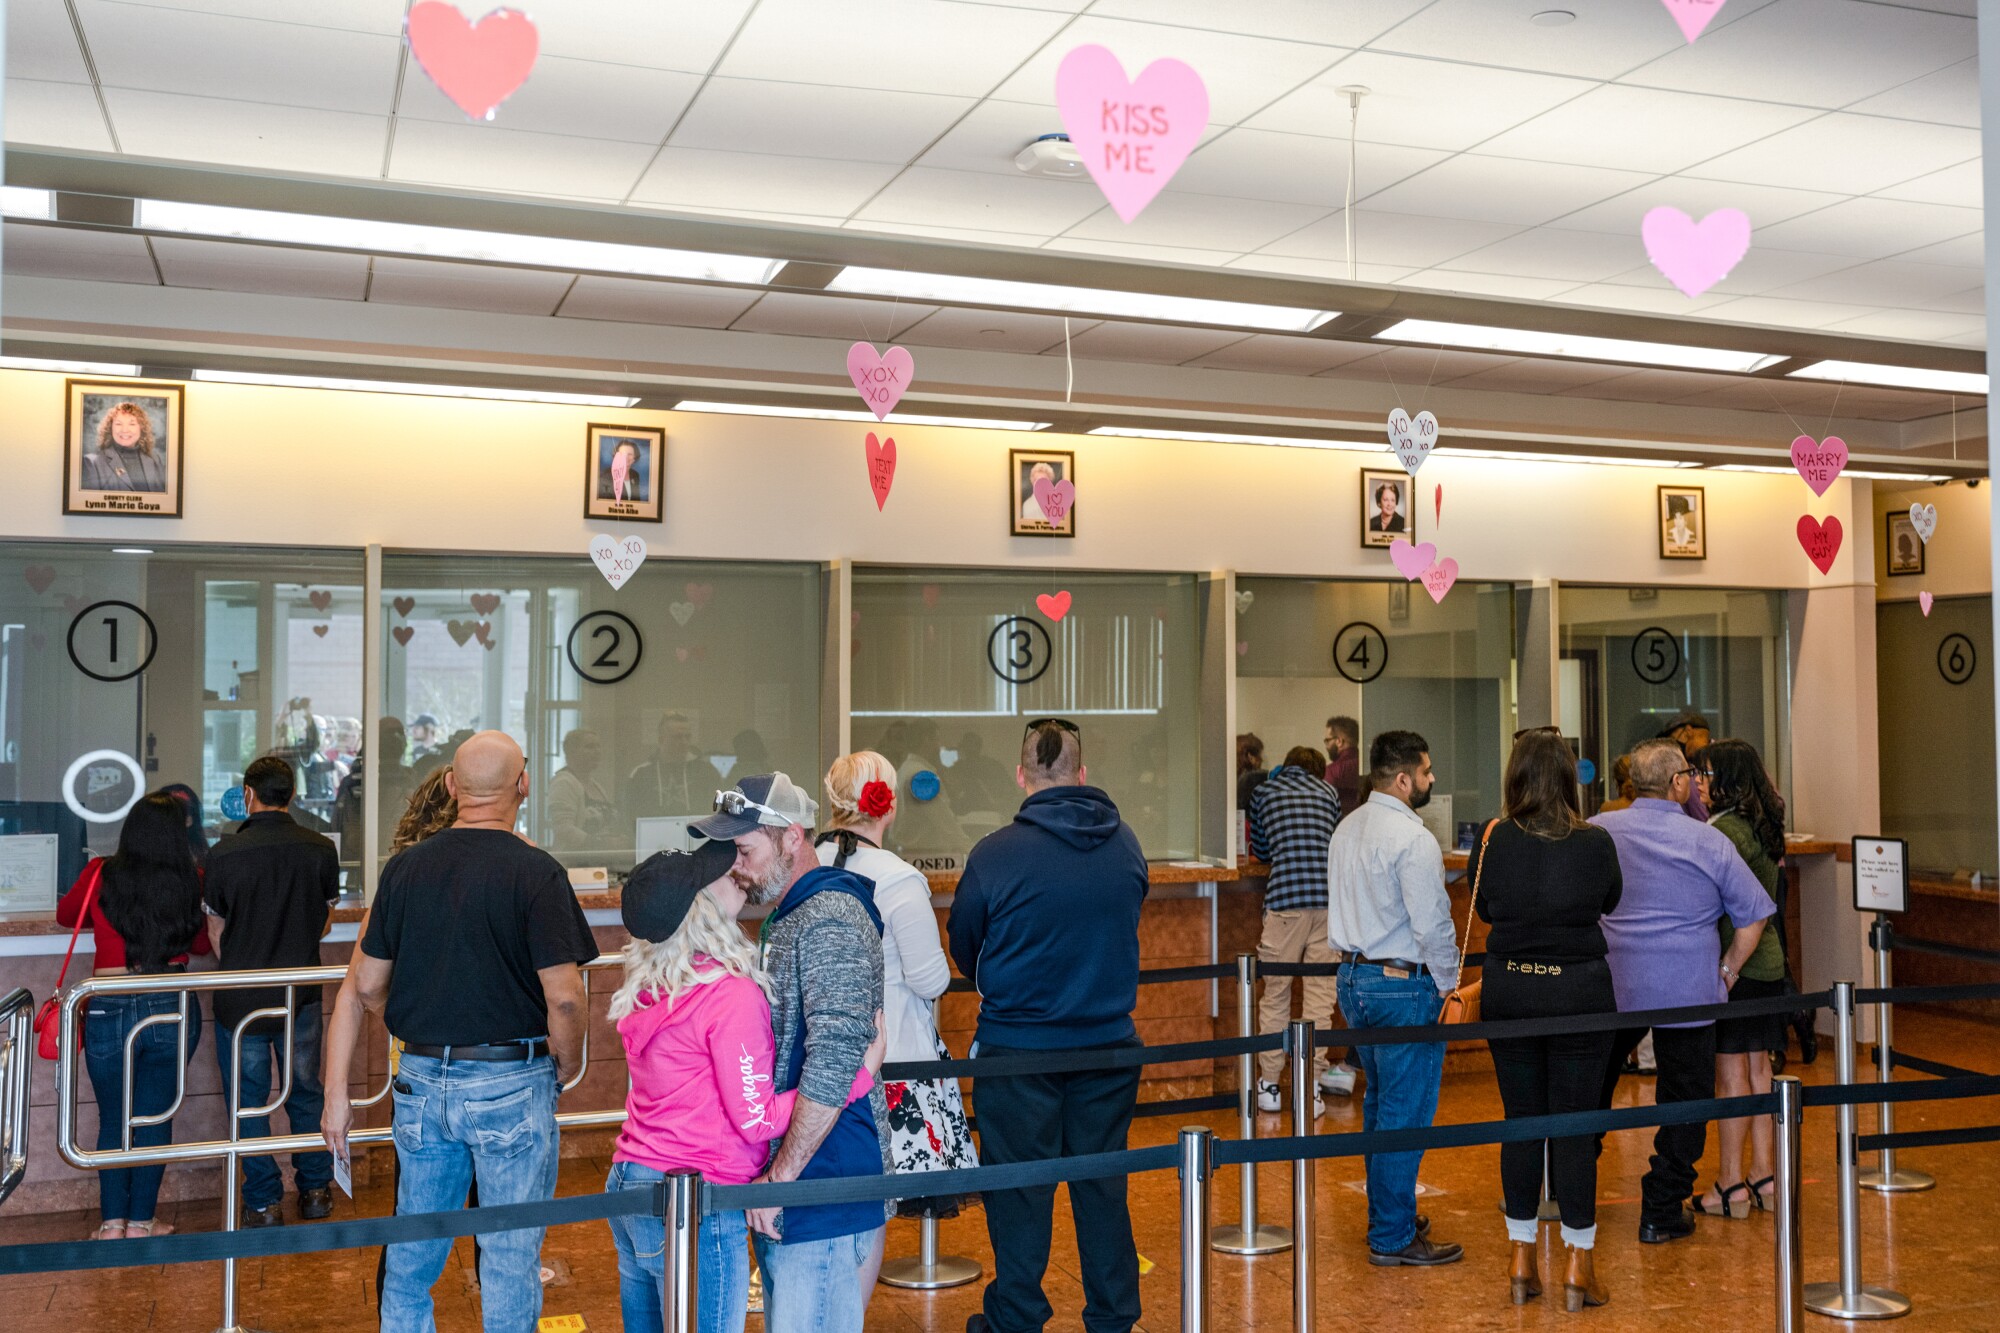 Couples wait in a line at a government office decorated with hearts 